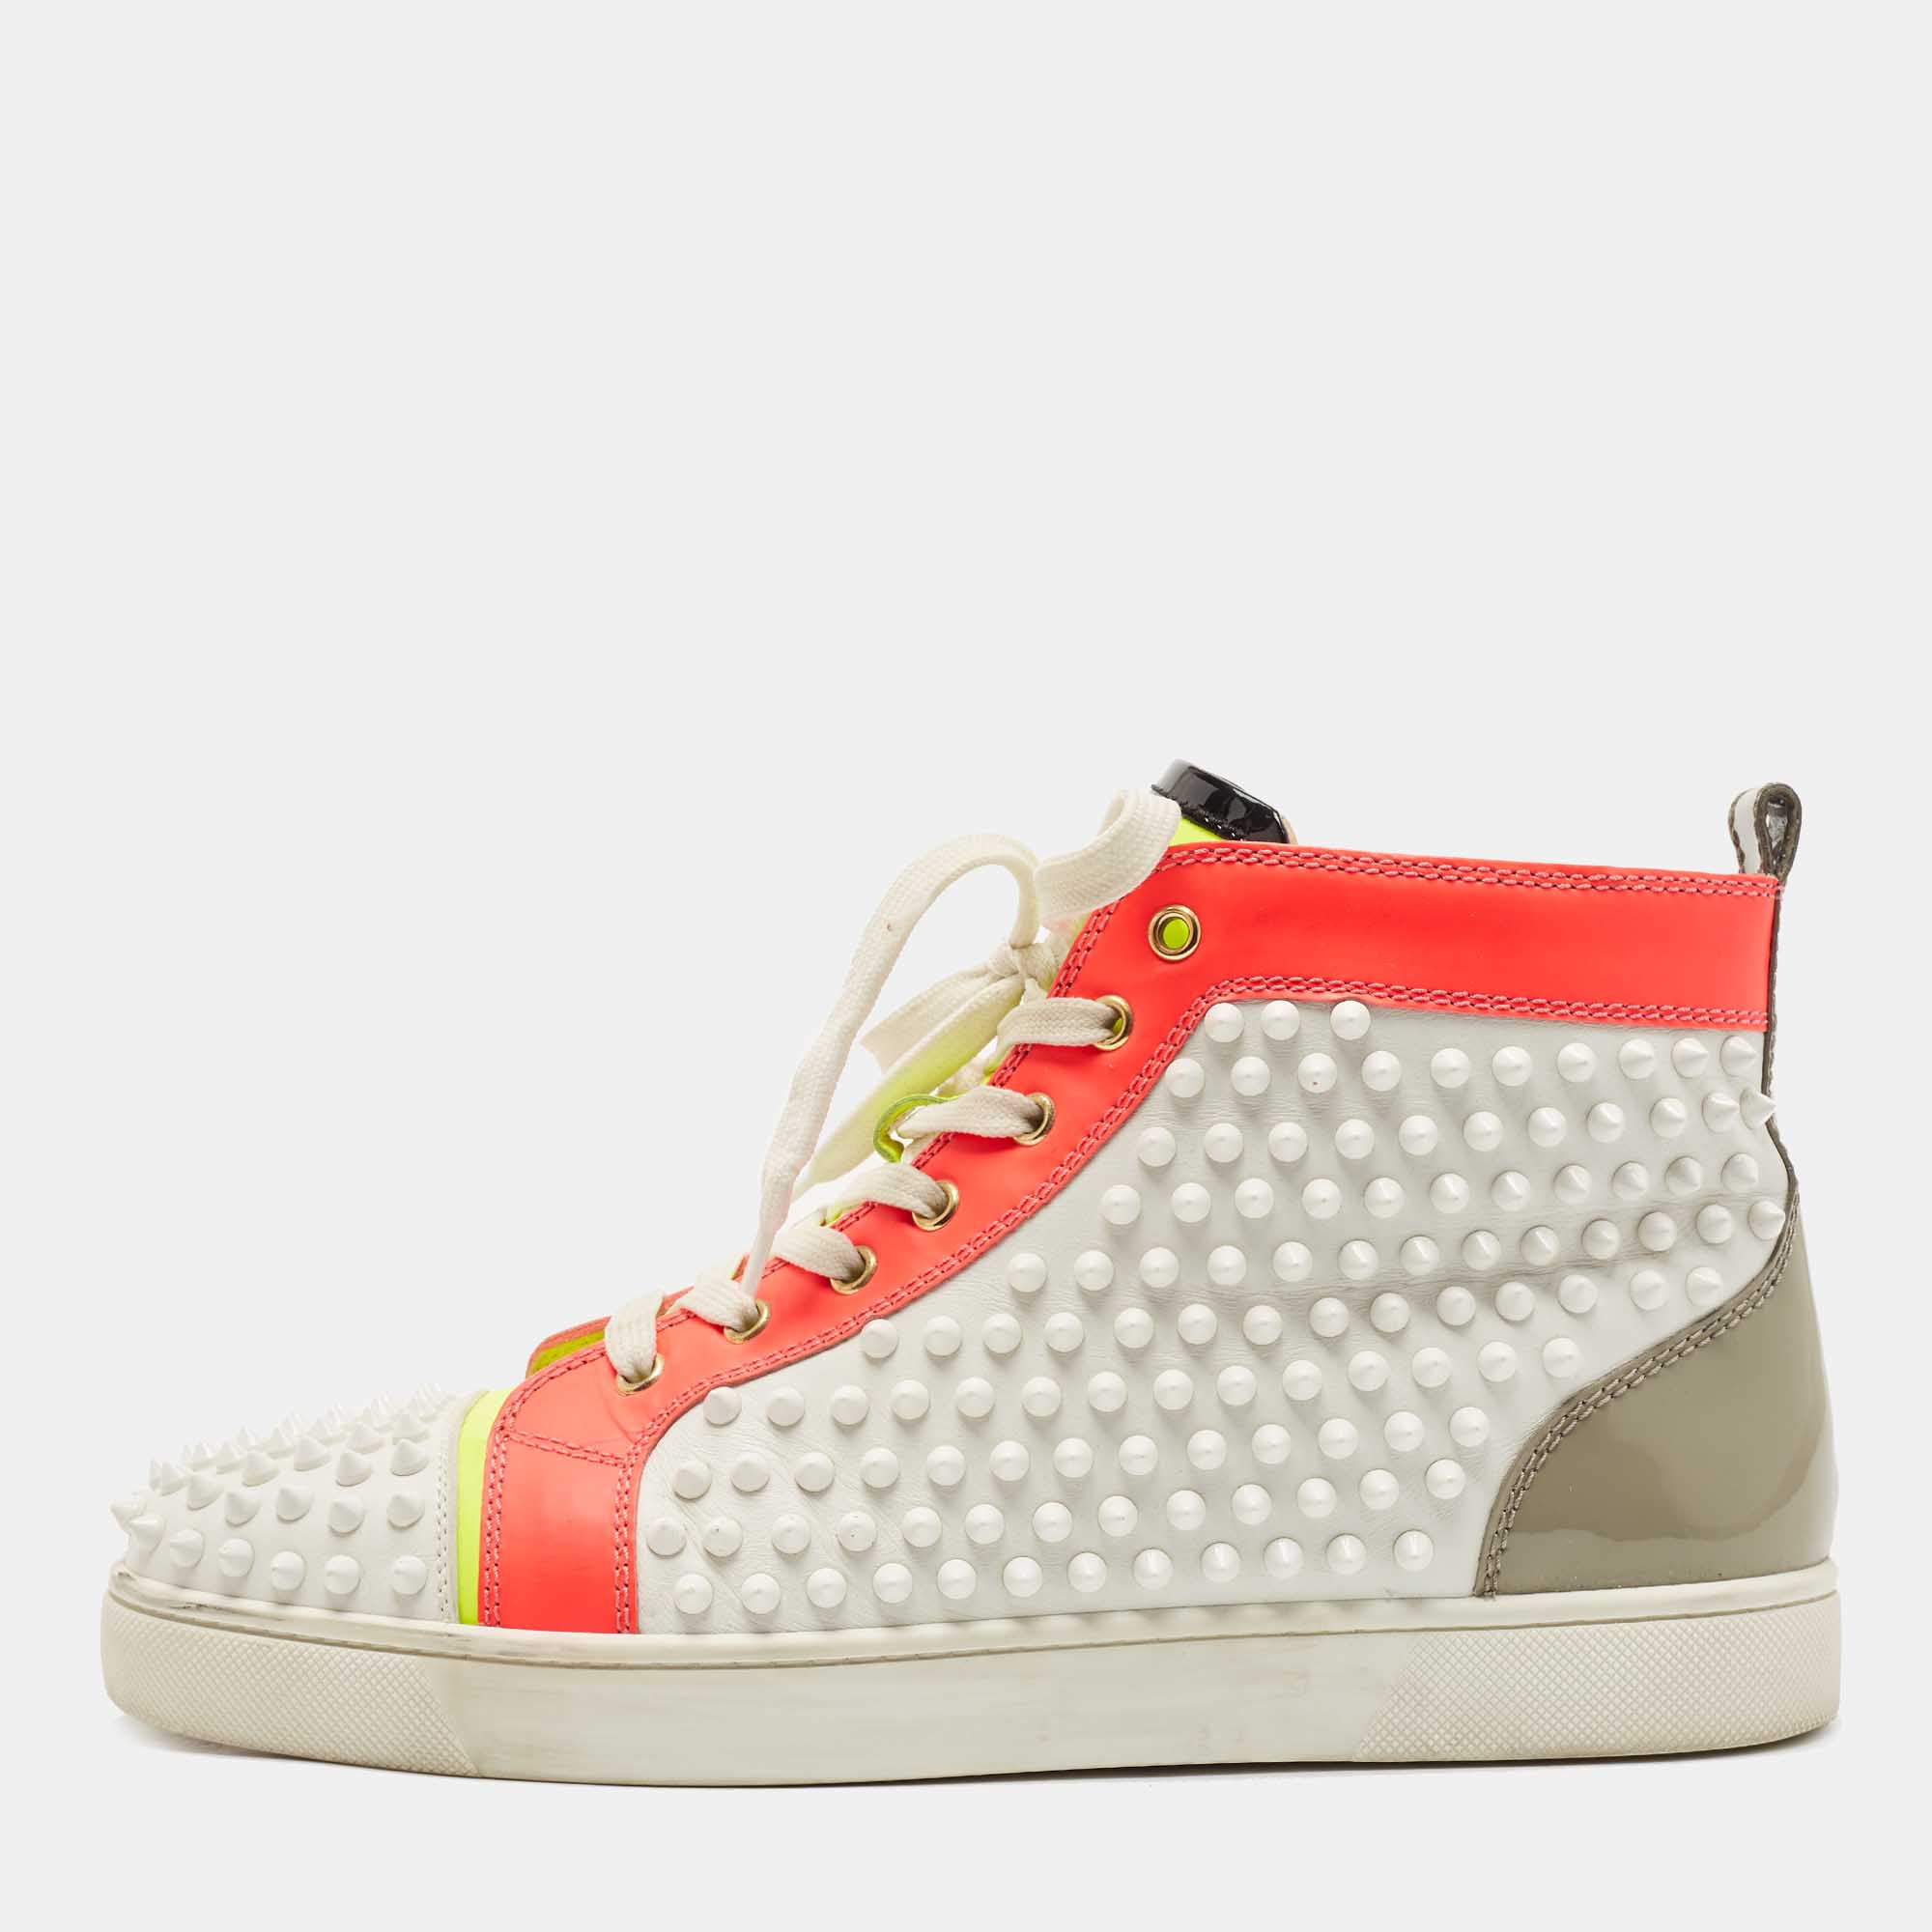 Louis Spiked Leather Trainers - CHRISTIAN LOUBOUTIN